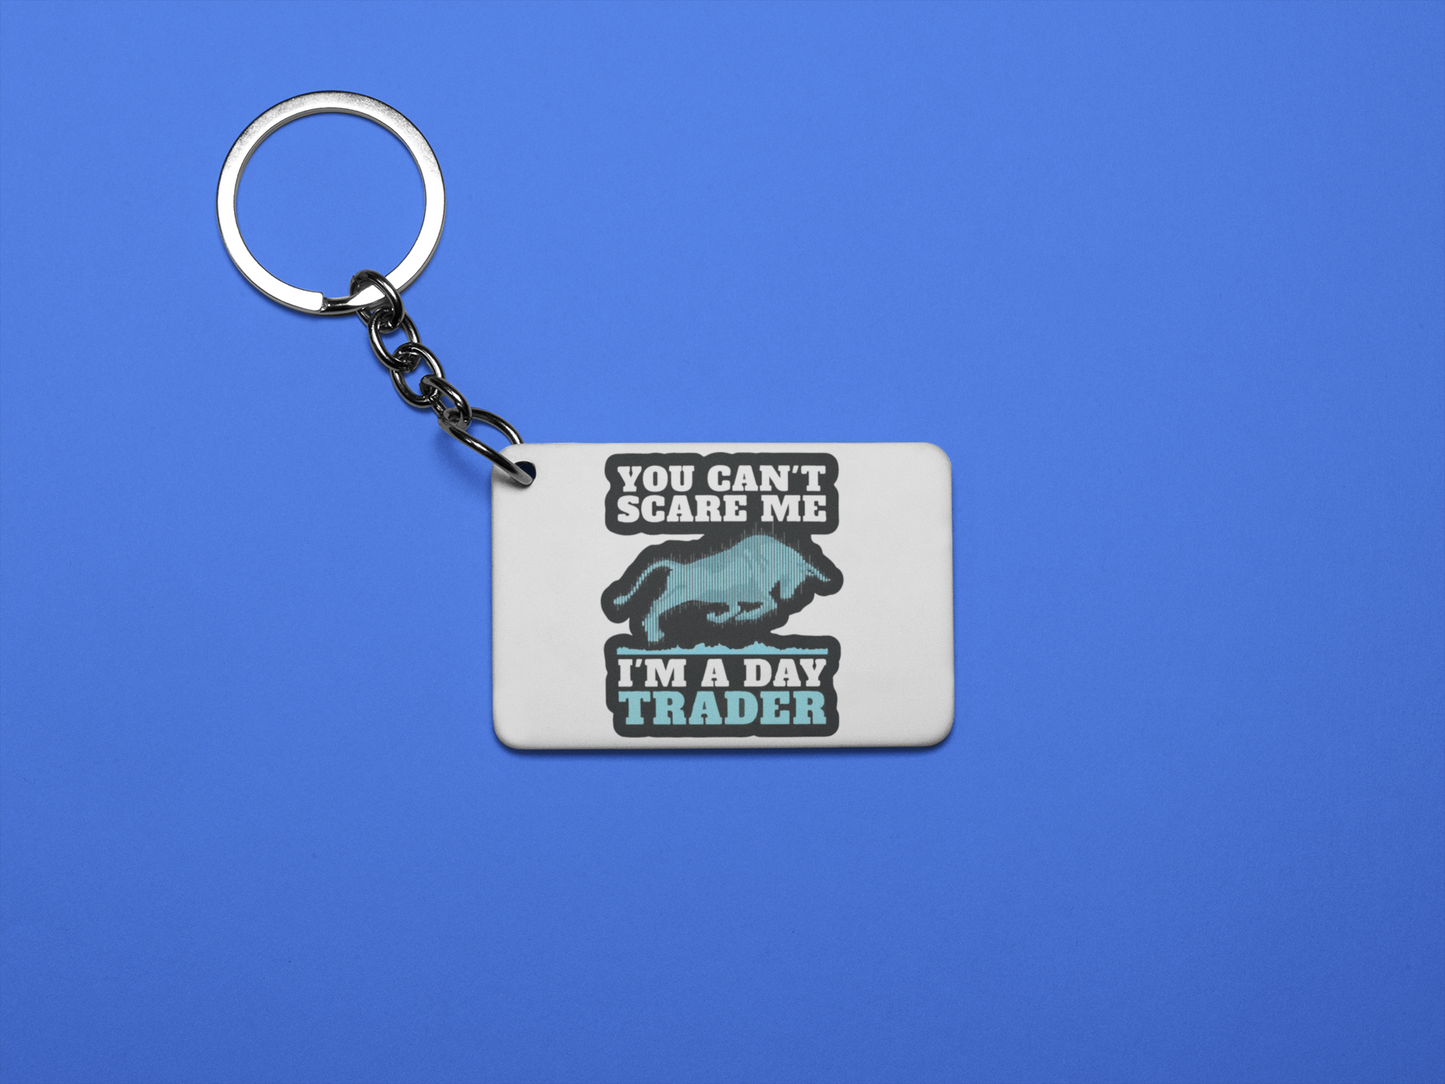 You can't scare me I'm a day trader keychain